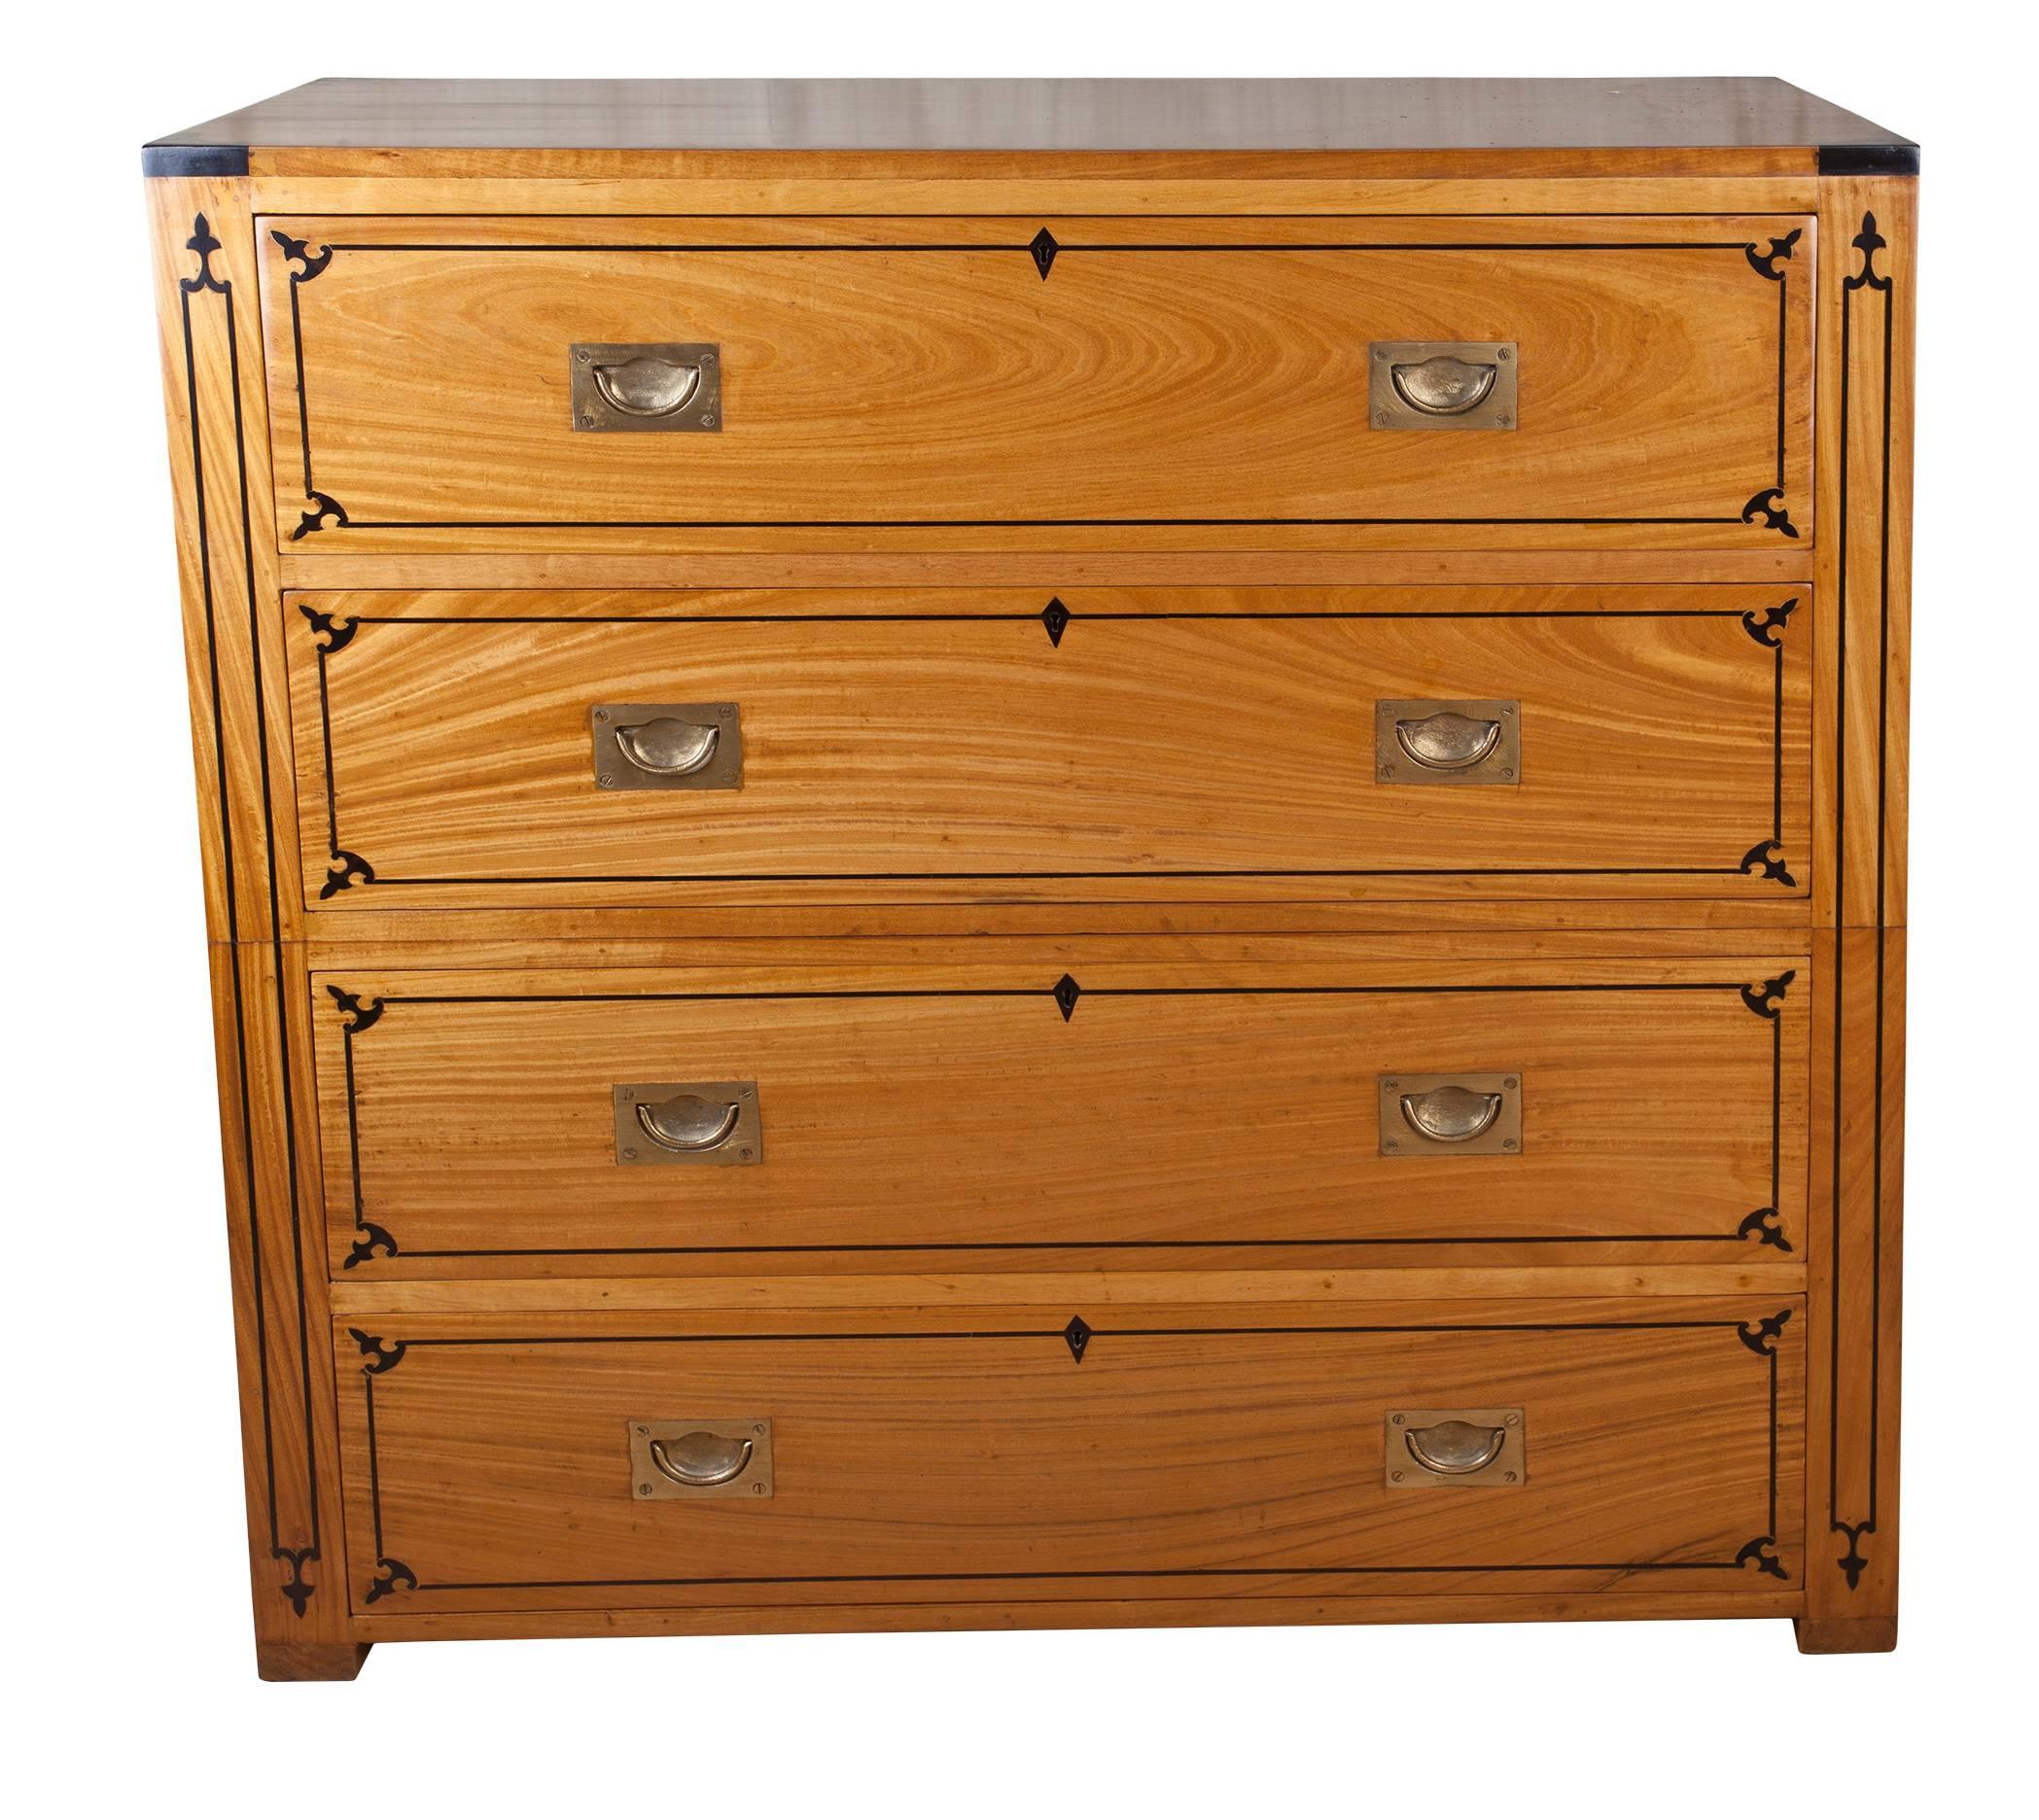 Mid-1900s British campaign secretary made of two very exotic and rare hardwoods. satinwood and ebony. Flush brass drawer pulls and fitted interior with secret compartments. The desk portion is 28 inches high. Perfect these days for tablets and